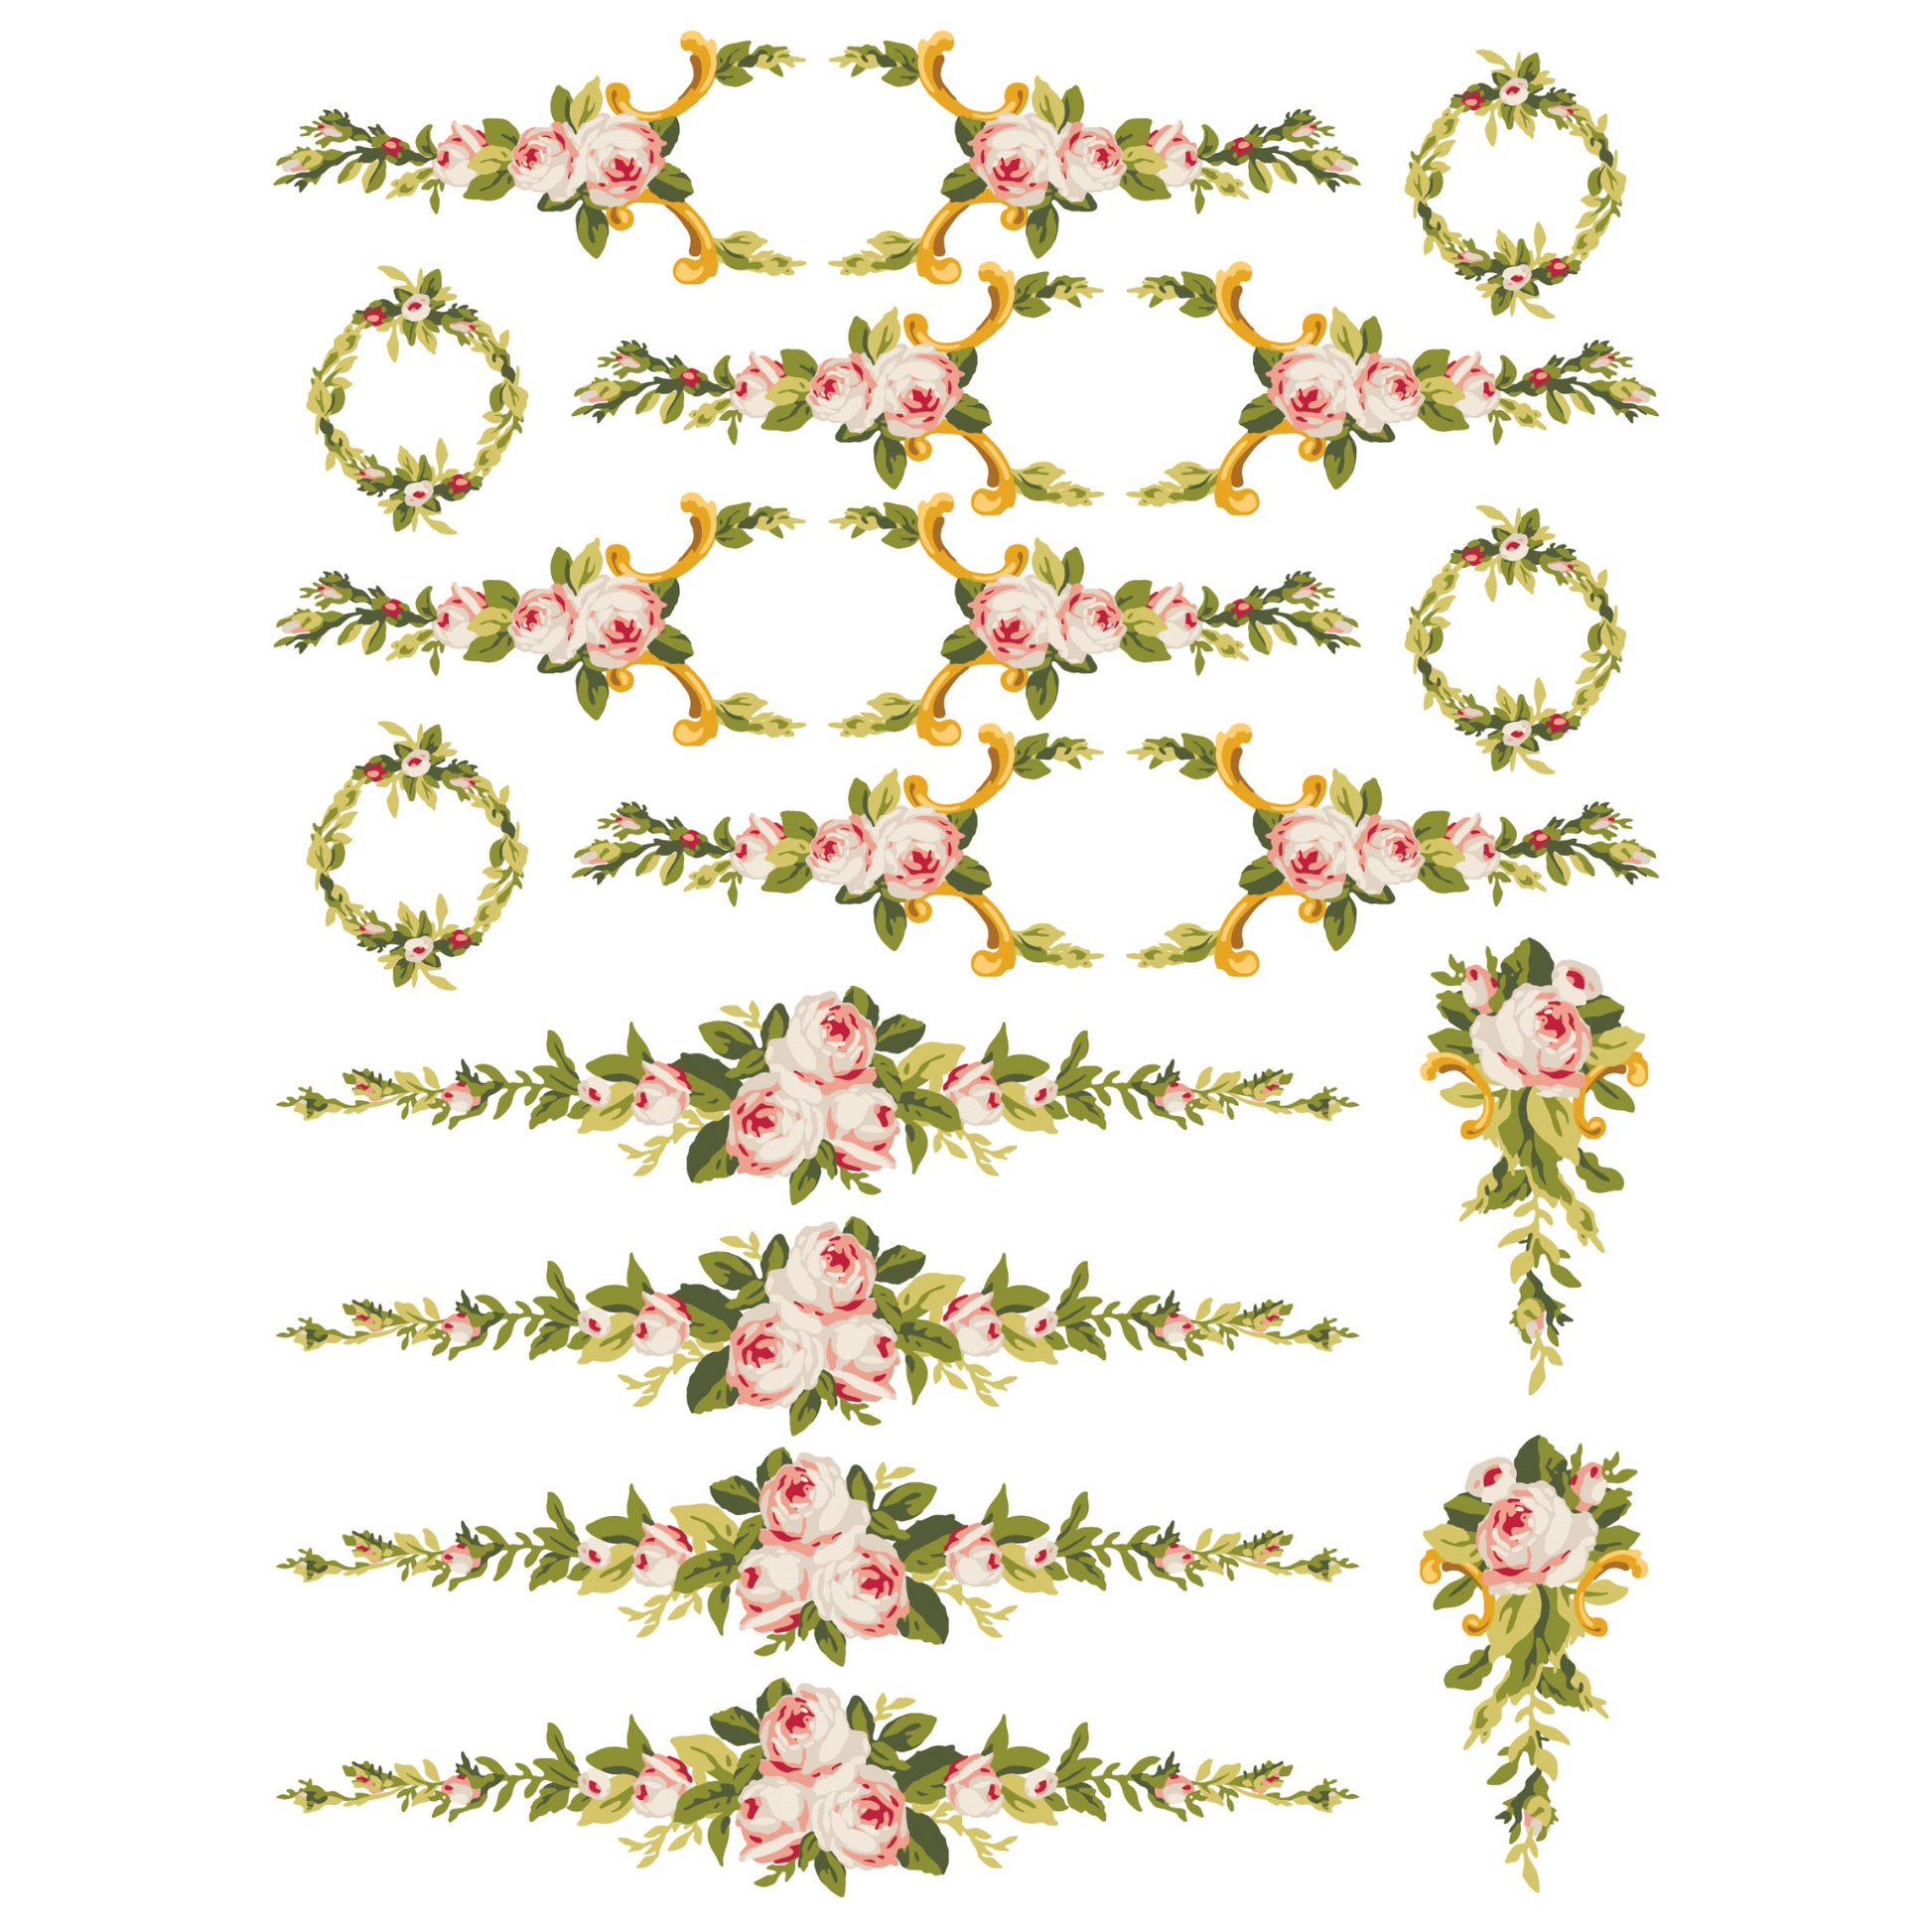 "Petite Fleur Pink" Paint Inlay IOD Furniture Transfer by Iron Orchid Designs.  Four 12" x 16" sheets. Page 1 of 4. Available at Milton's Daughter.